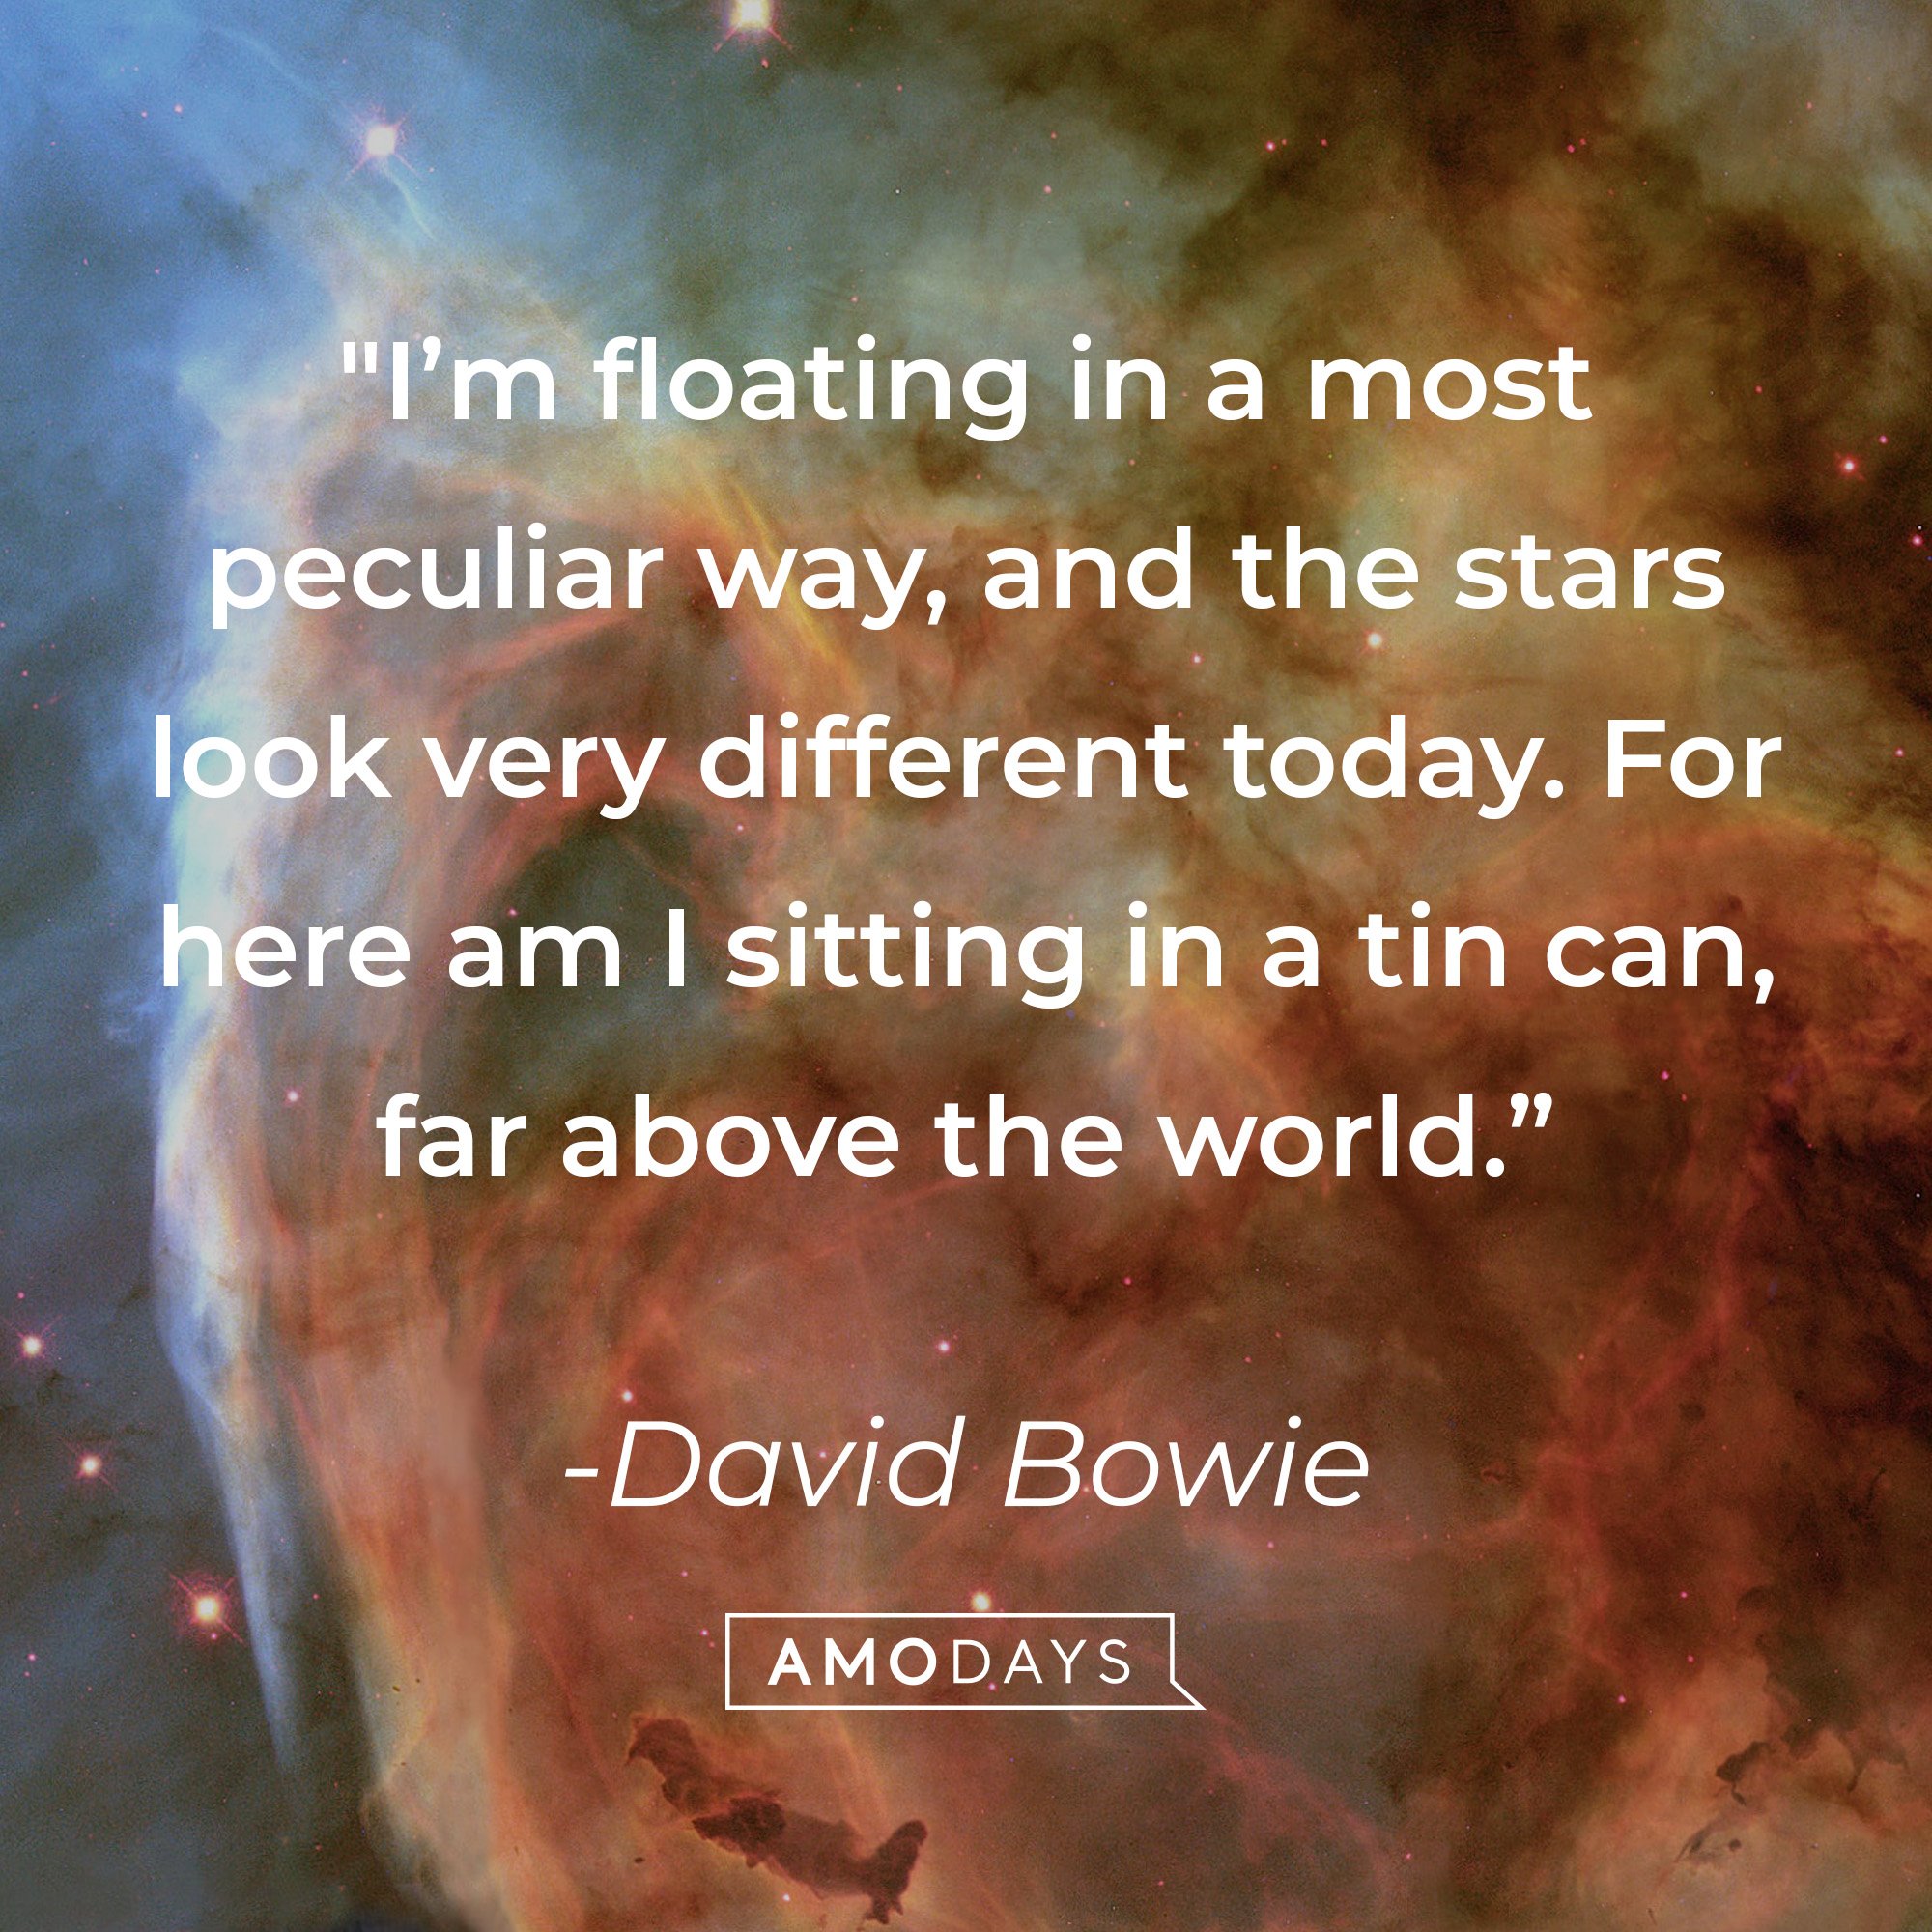 David Bowie’s quote: "I’m floating in a most peculiar way, and the stars look very different today. For here am I sitting in a tin can, far above the world." | Image: AmoDays